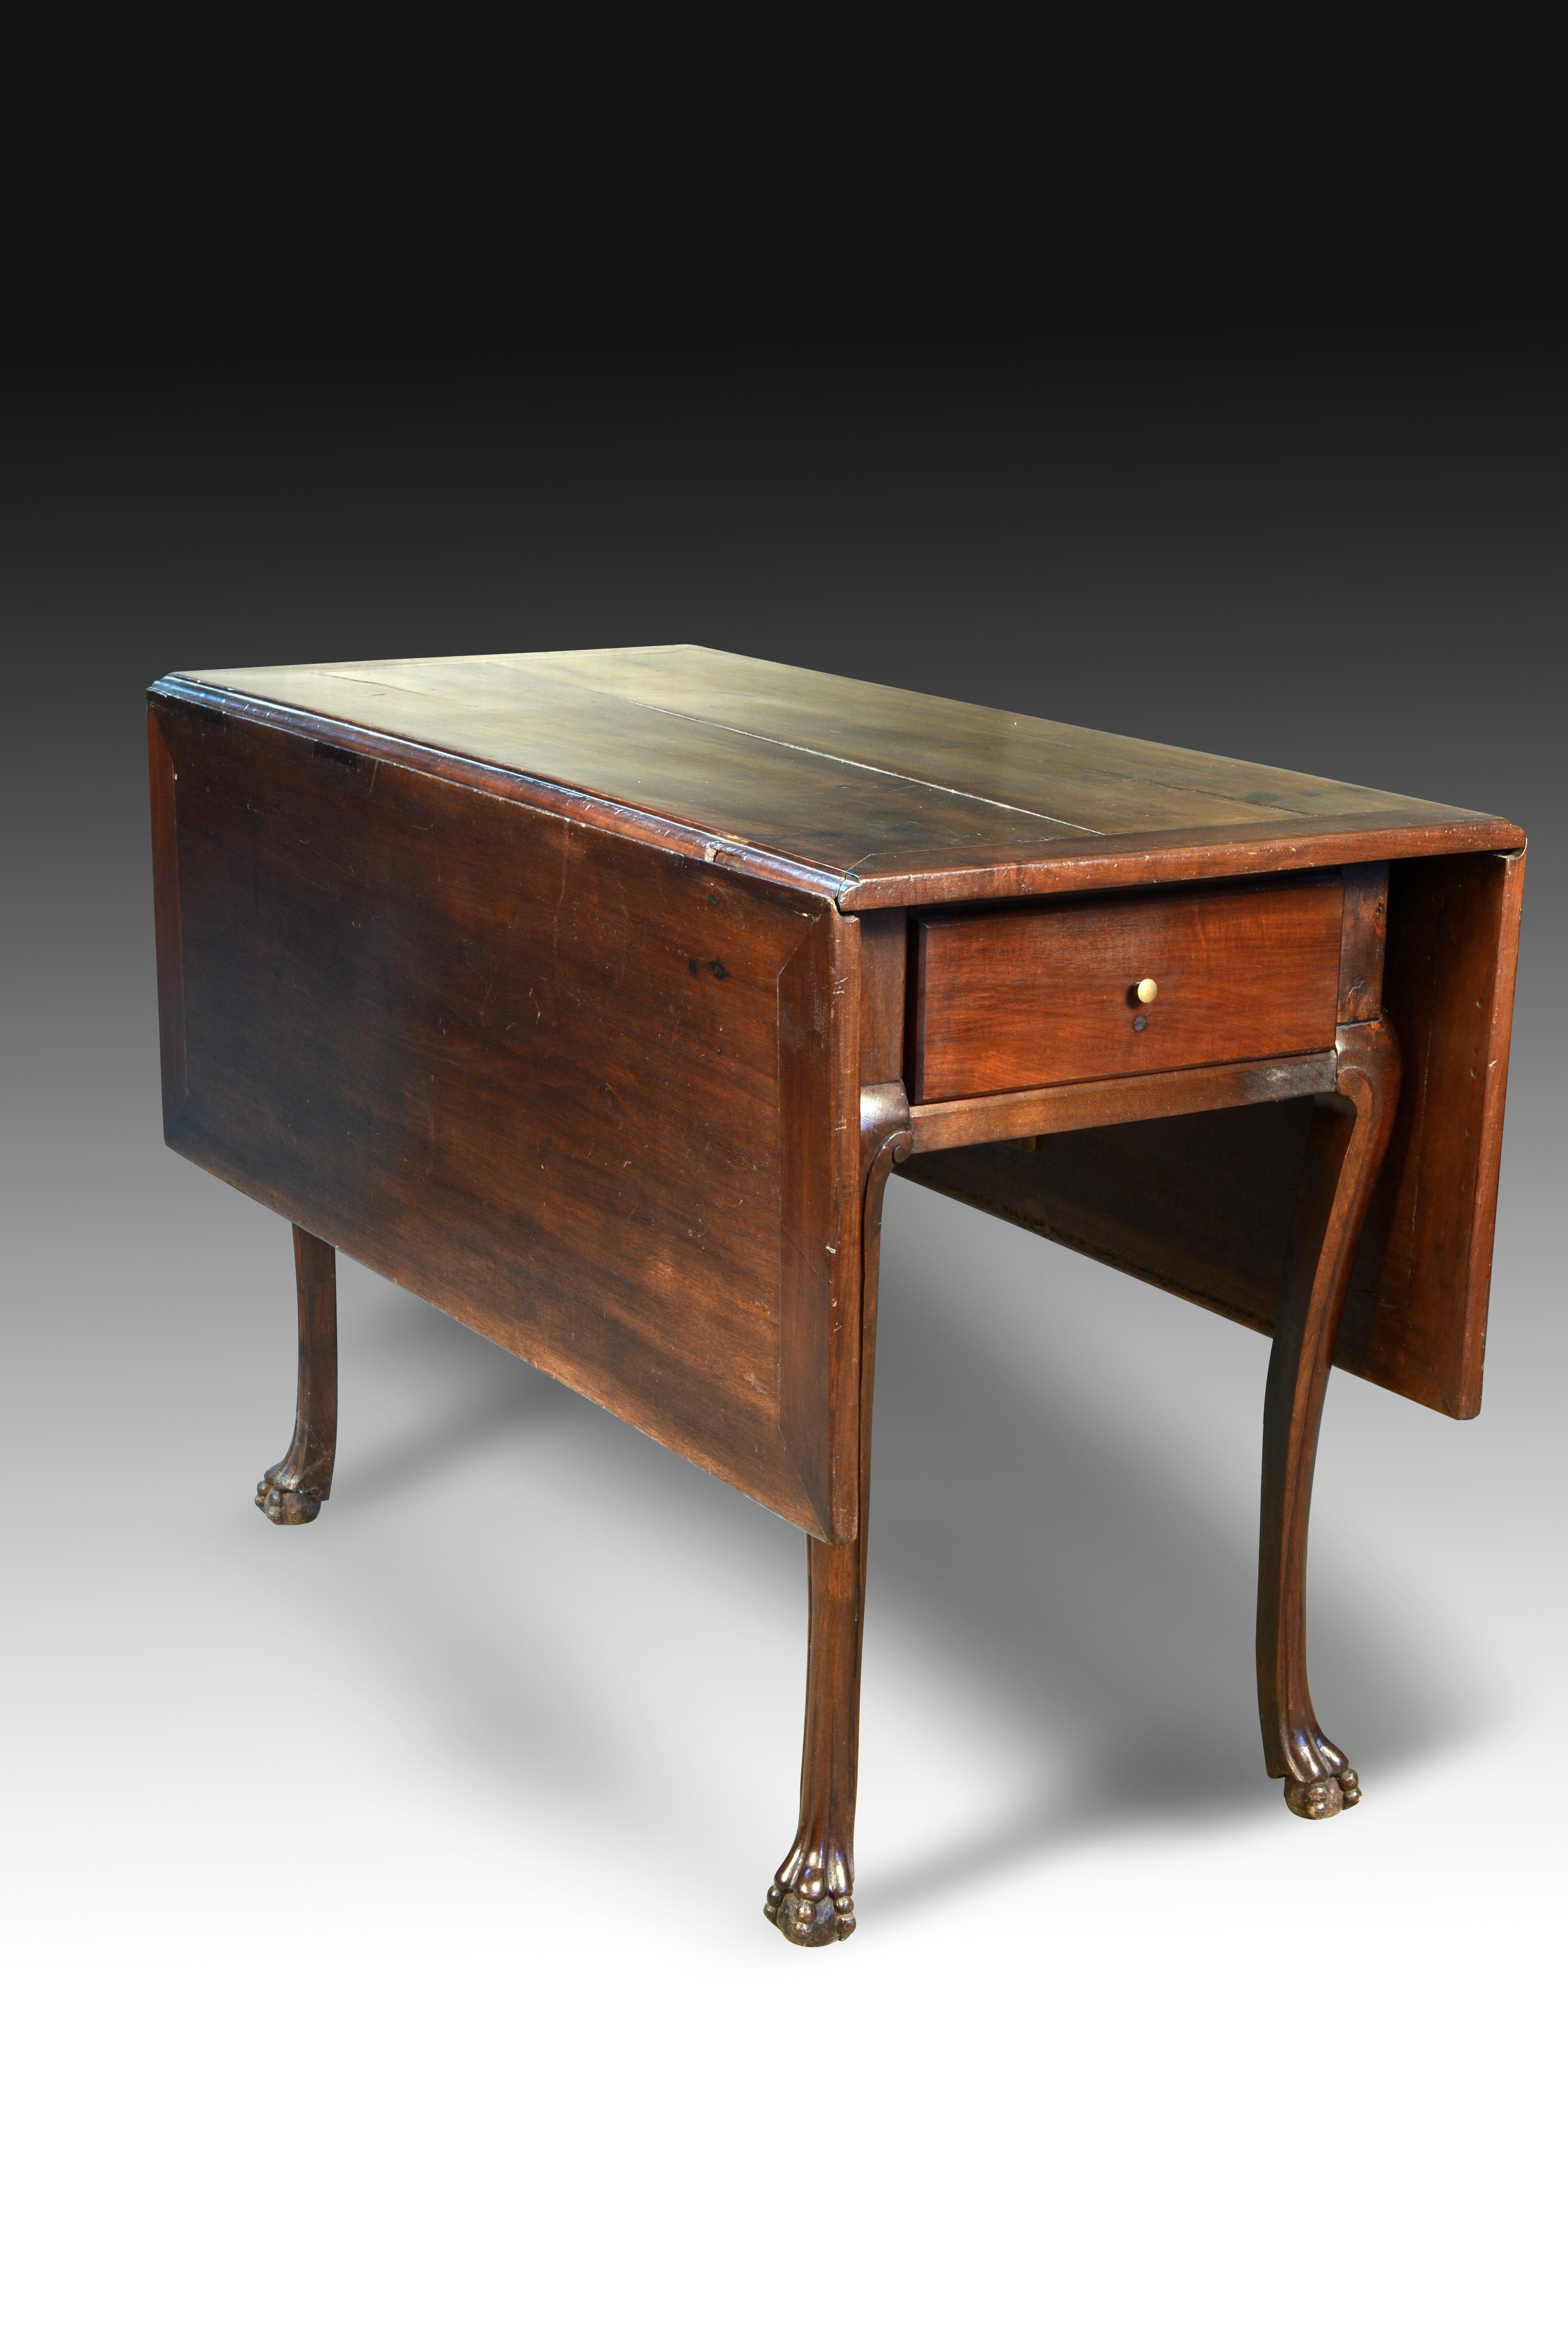 This rectangular table has four legs ended in eagle talons holding balls, and has a drawer and two folding boards (whose name comes from this typology). The decorative simplicity of the work is due to its creation as a mainly functional furniture,